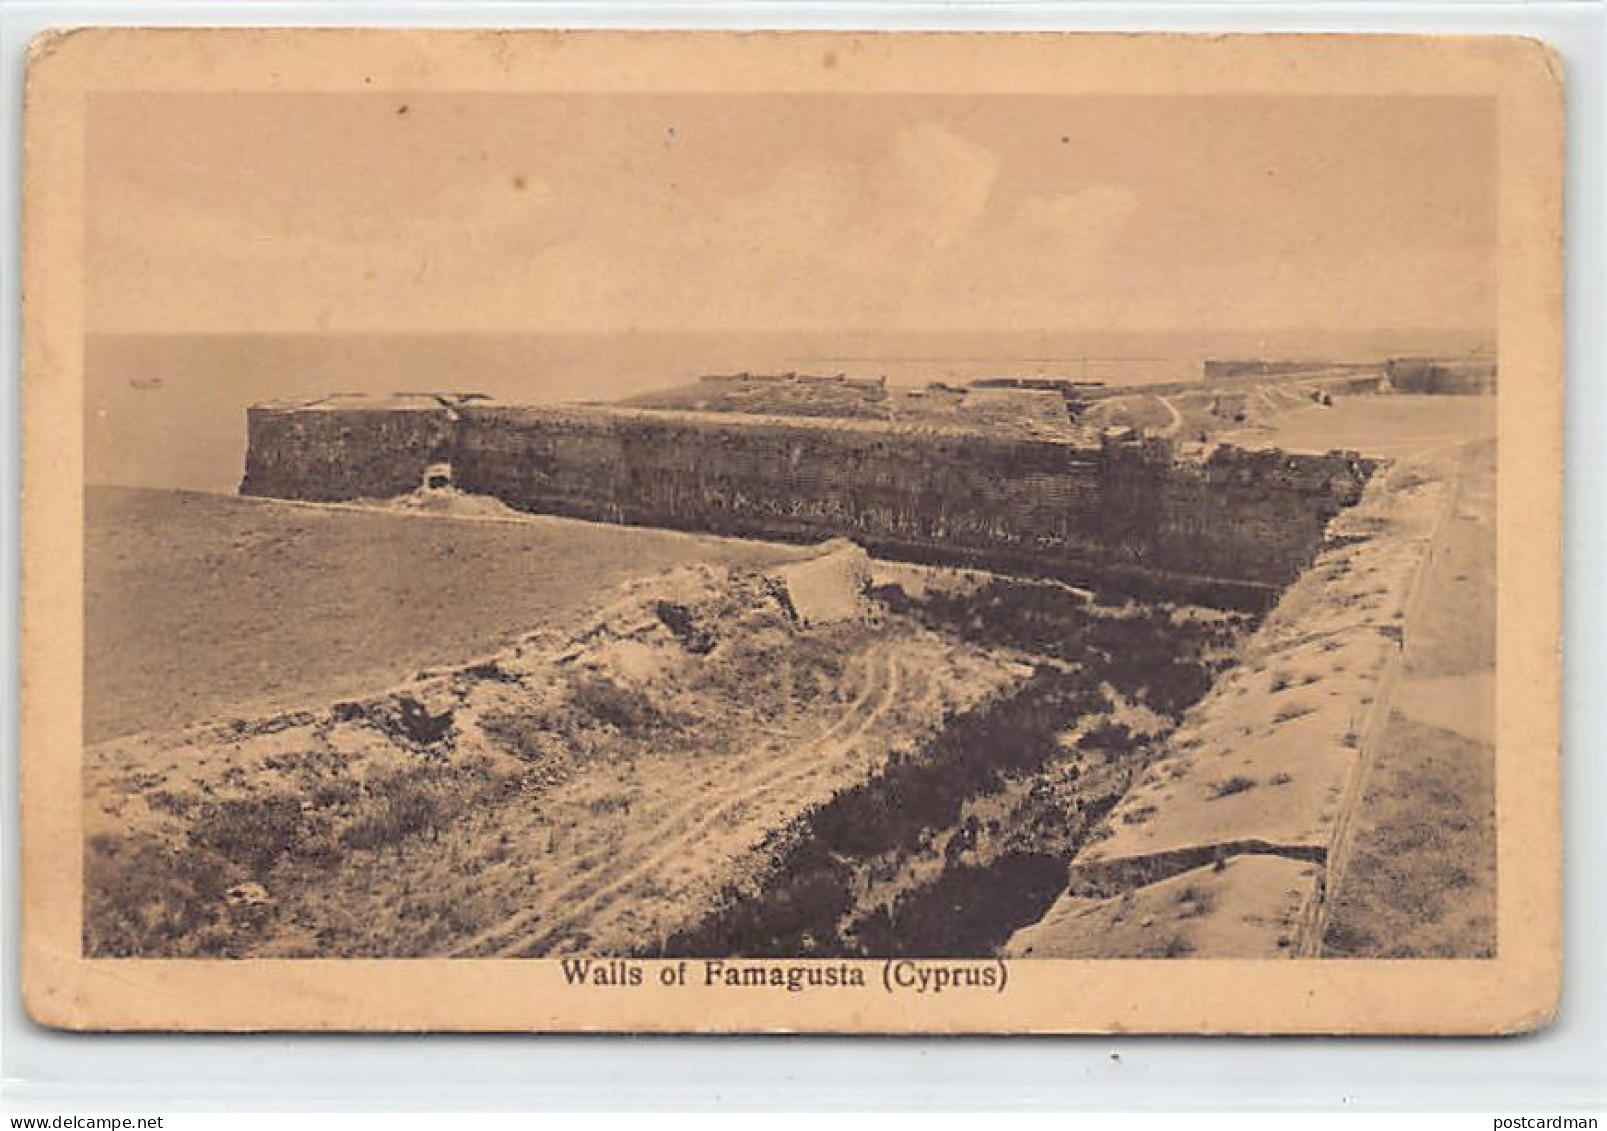 Cyprus - Walls At Famagusta - SEE SCANS FOR CONDITION - Publ. Mangoian Bros. 372 - Chipre